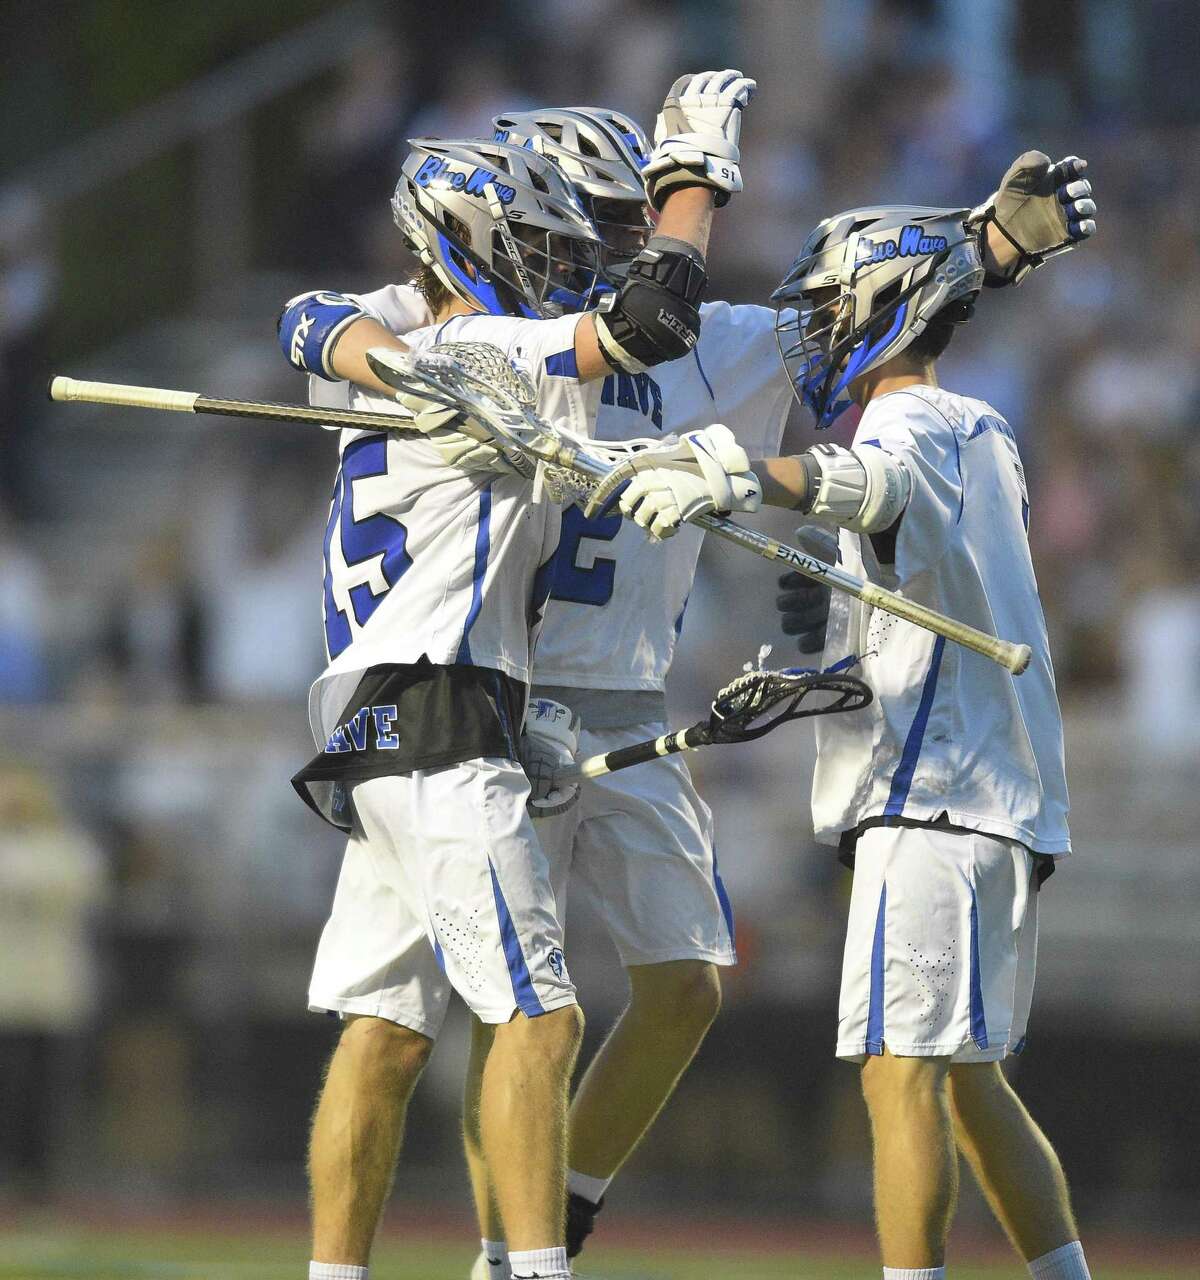 Darien defeated Staples 9-6 in a CIAC boys lacrosse Class L state tournament semifinal game at Brien McMahon High School in Norwalk on June 5, 2019.